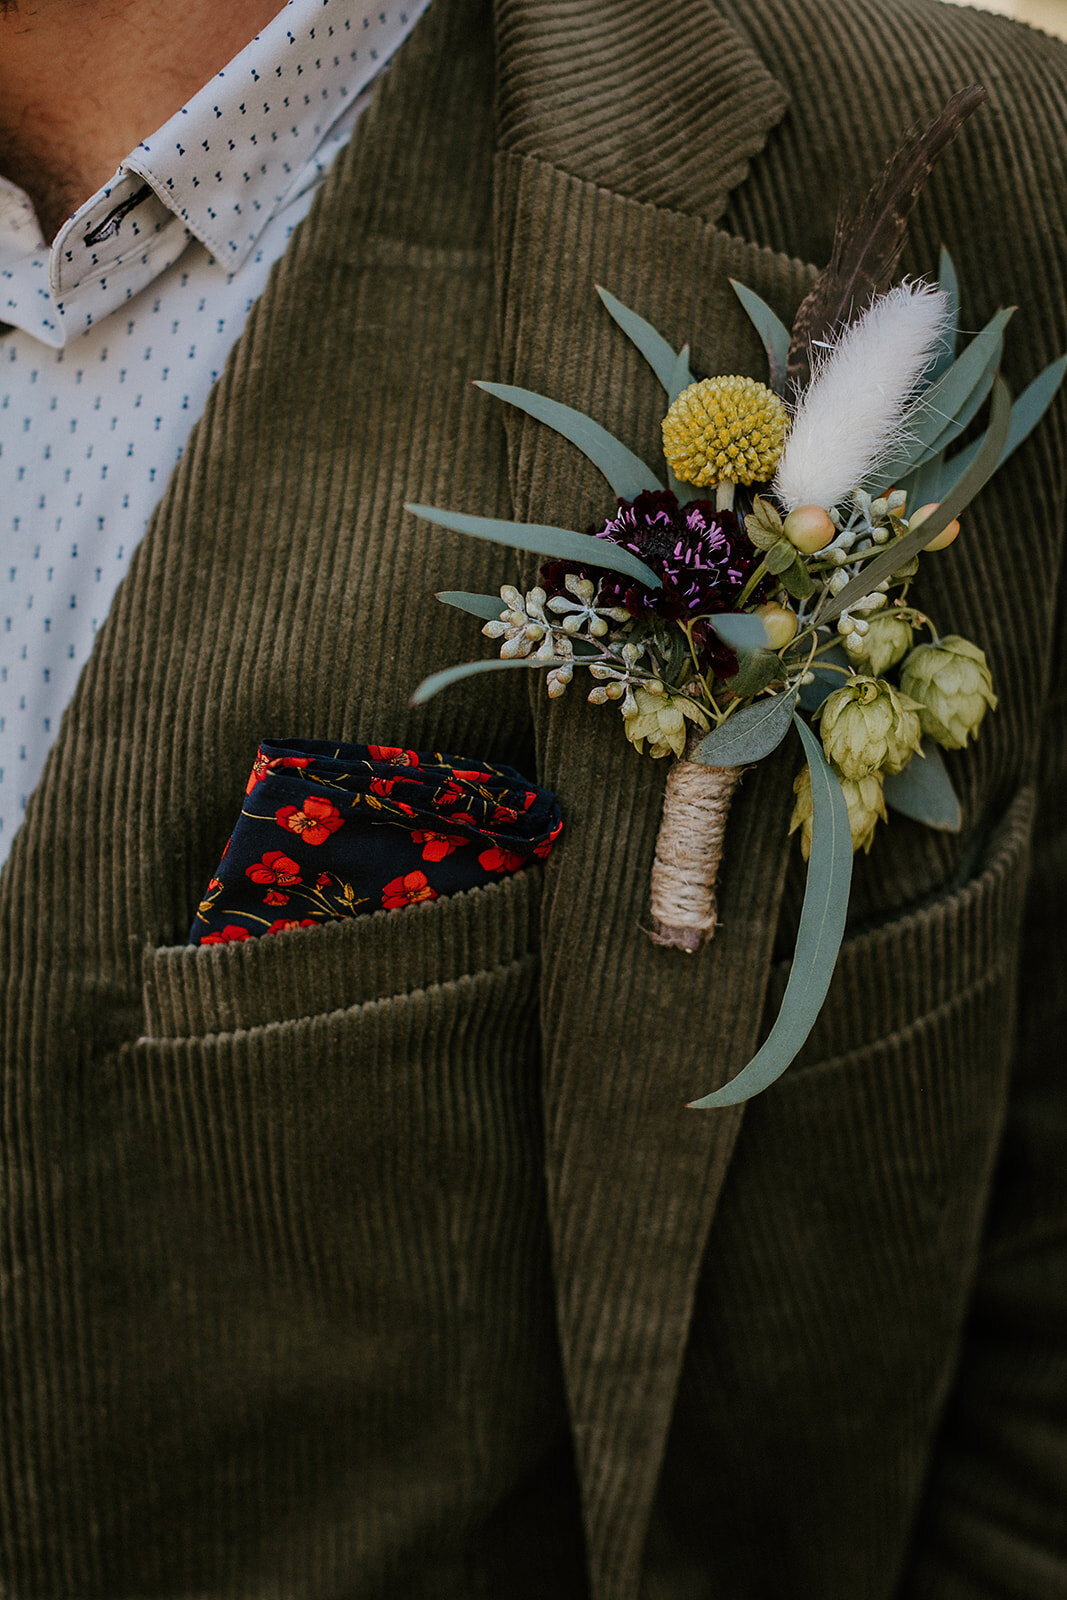 Boutonniere with hops, scabiosa, billy ball and bunny tail grass wrapped in twine on green jacket